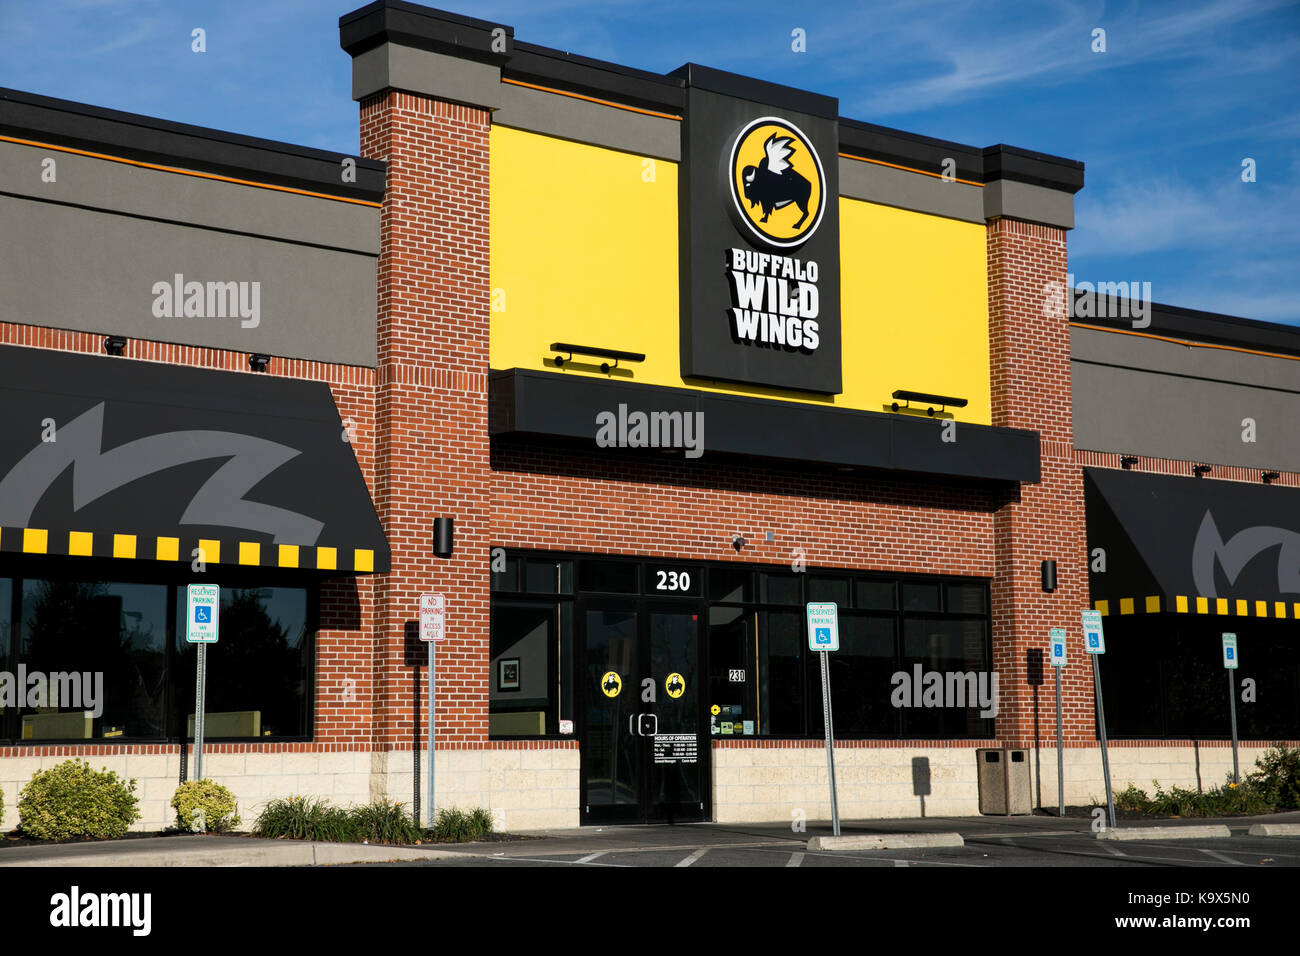 A logo sign of a Buffalo Wild Wings location in Hagerstown, Maryland on September 23, 2017 Stock Photo Alamy